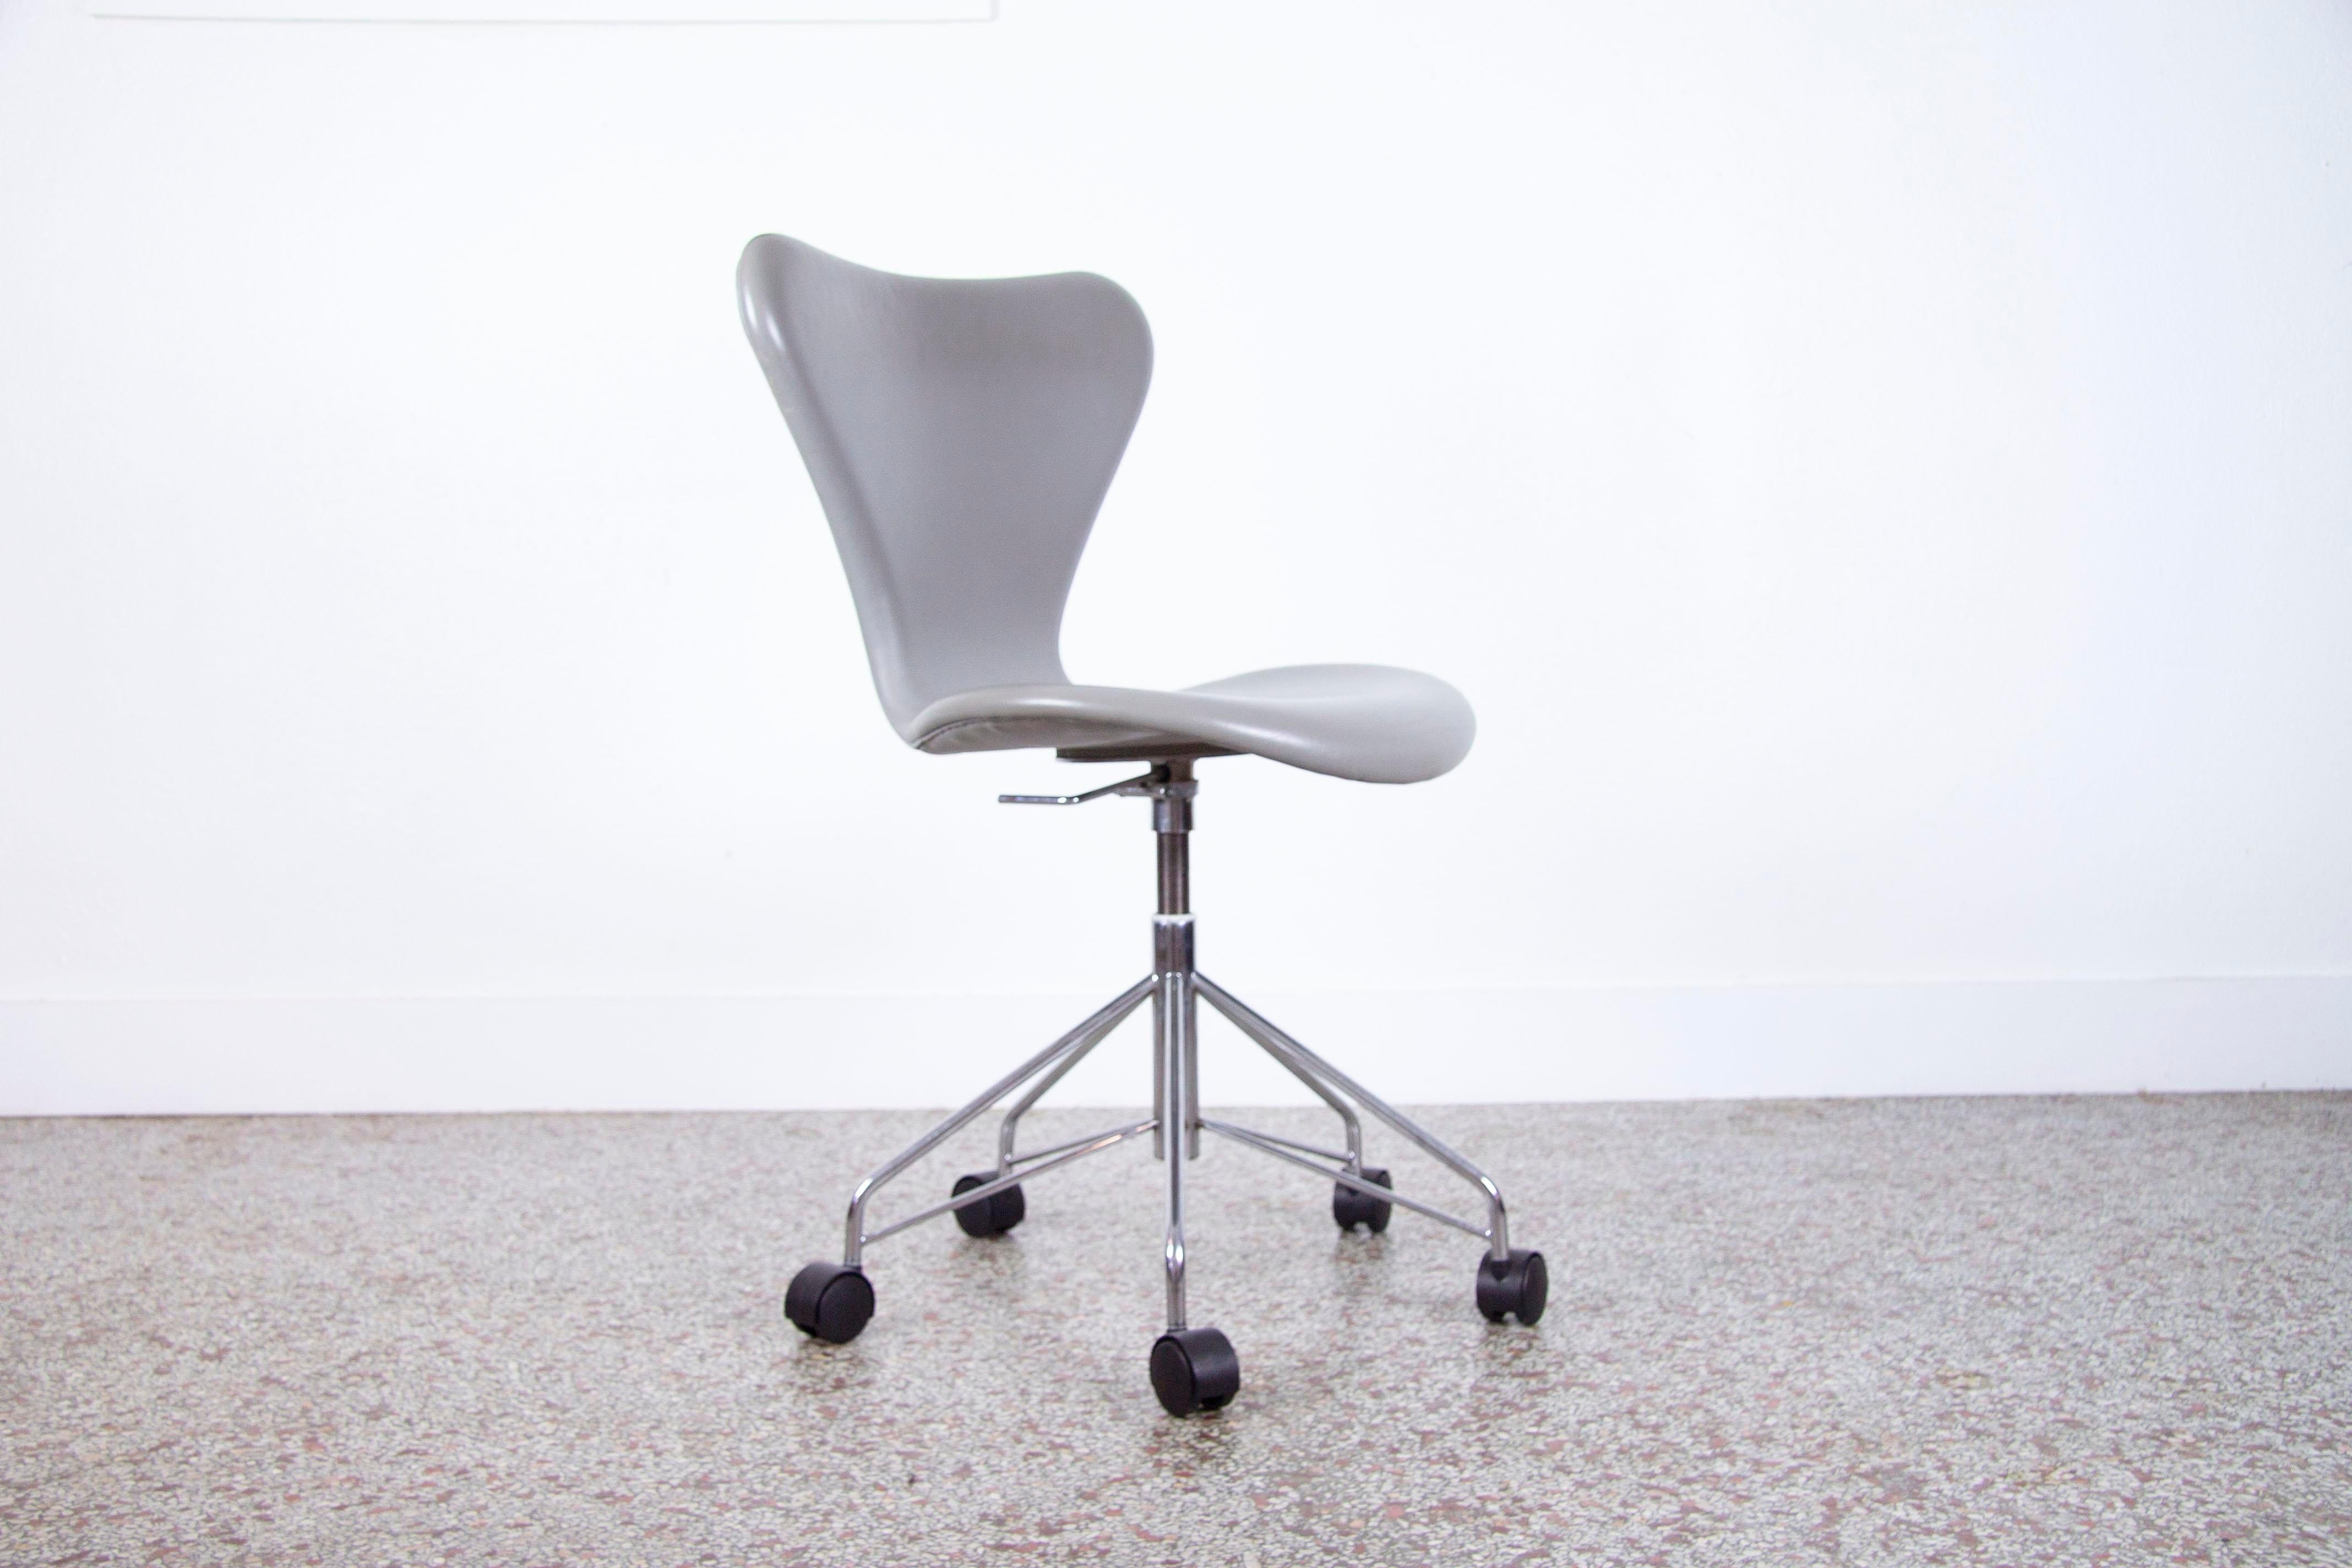 Arne Jacobsen Model 3117 series 7 desk chair fully upholstered in Grey leather. Features a chrome metal base with adjustable height controls. The Series 7 range of chairs was designed in 1955 and has become one of the most iconic chair designed in